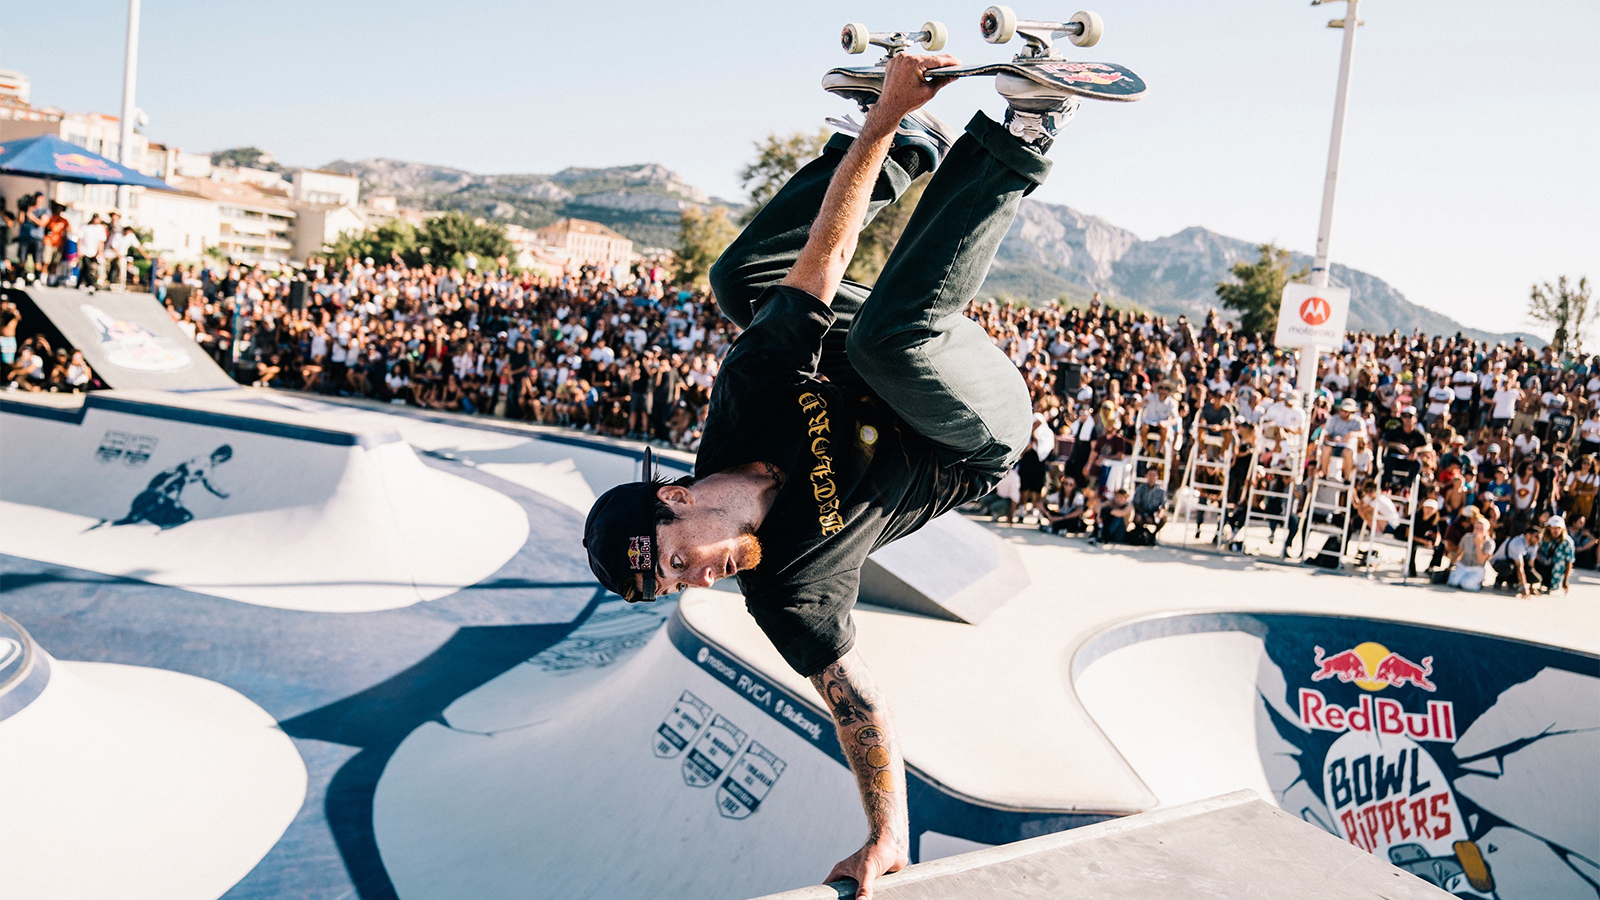 Voorbereiding Geld lenende spreiding Red Bull Bowl Rippers 2019 Comes To Marseille - Boardsport SOURCE